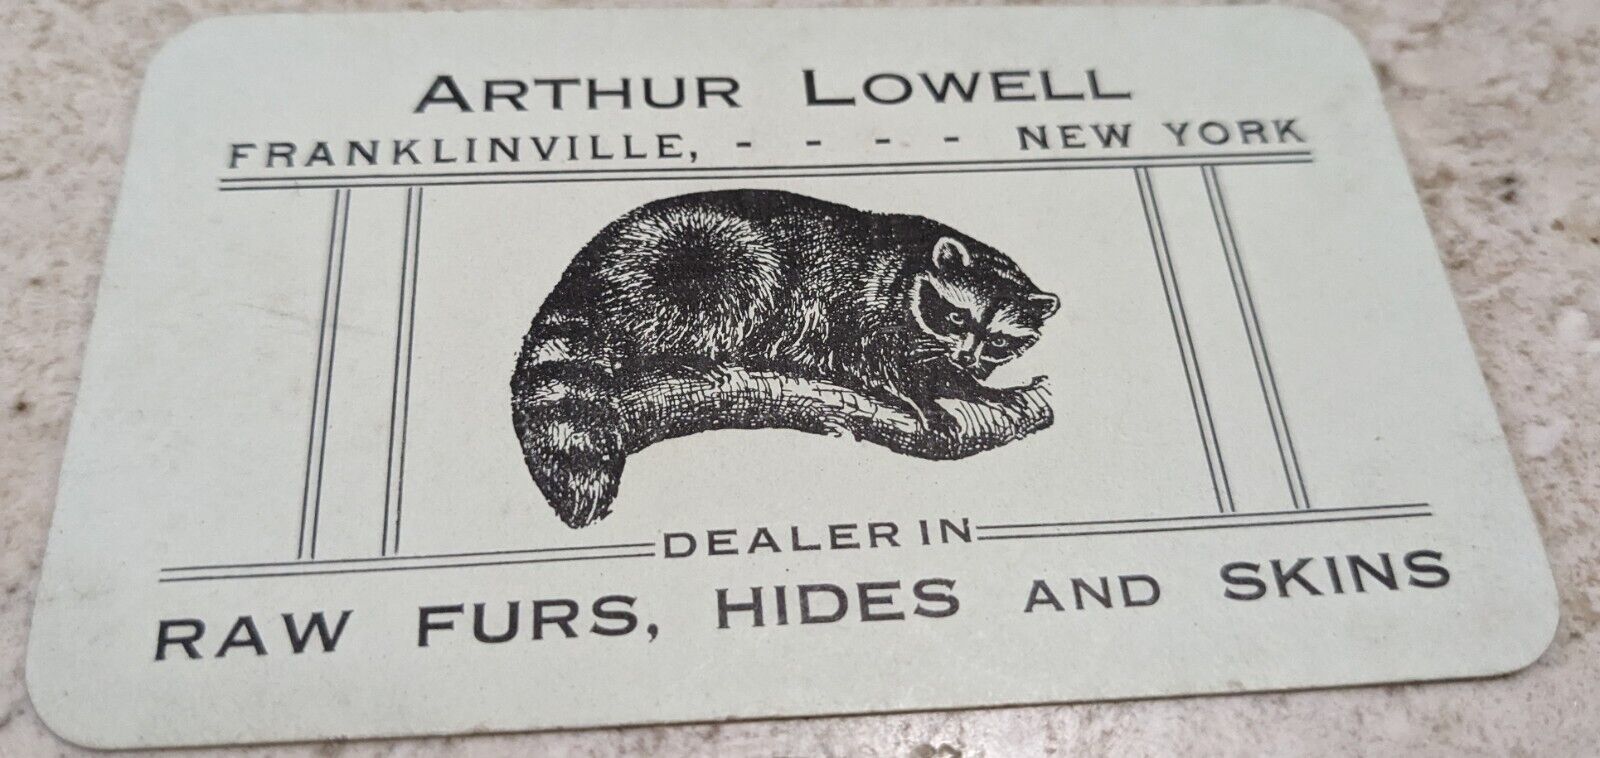 *RARE* VICT. TRADE CARD ARTHUR LOWELL RAW FURS HIDES & SKINS FRANKLINVILLE NY